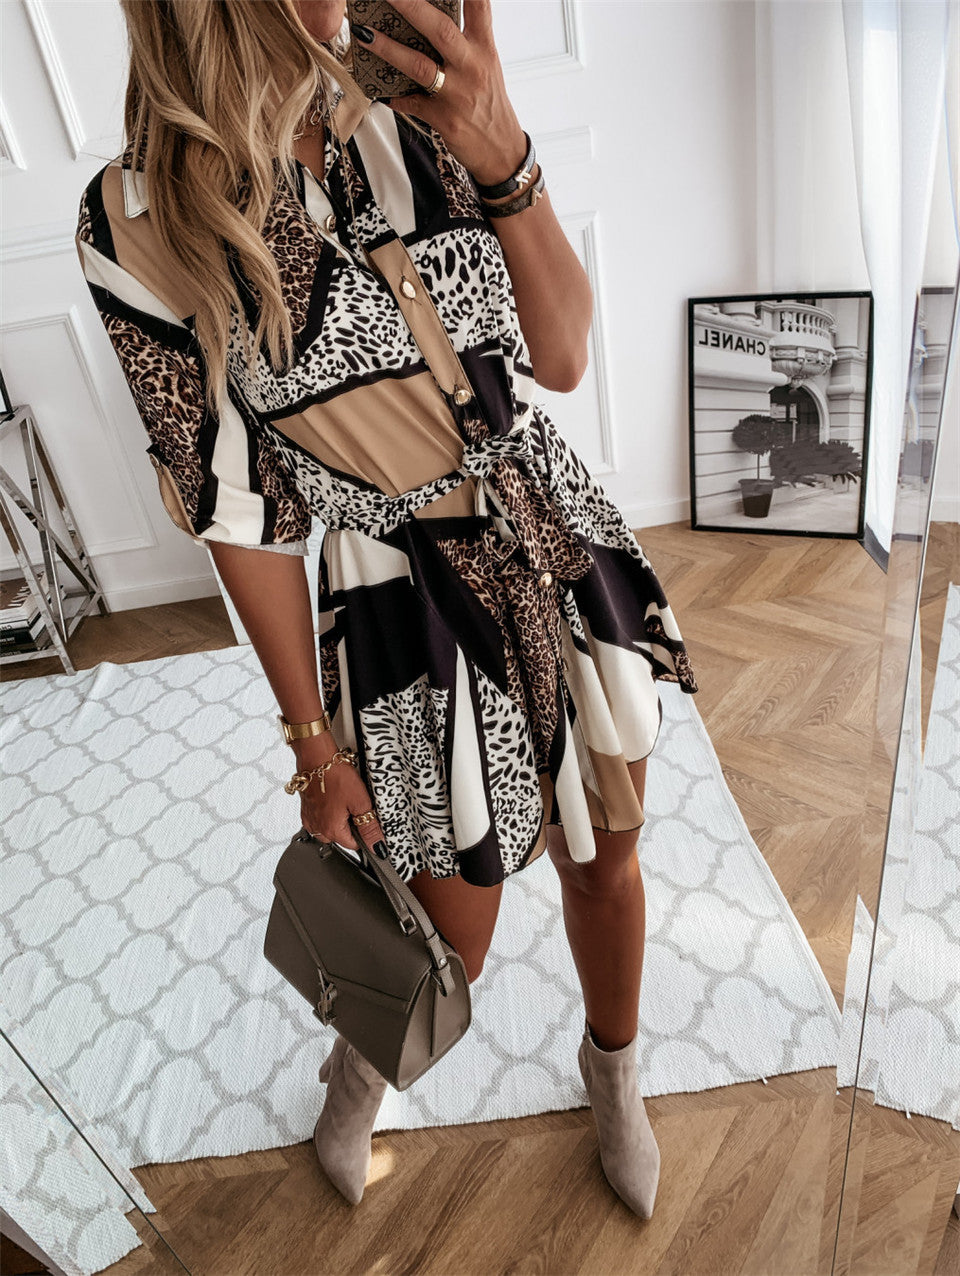 New elegant and sexy dress, casual wear, printed shirt dress